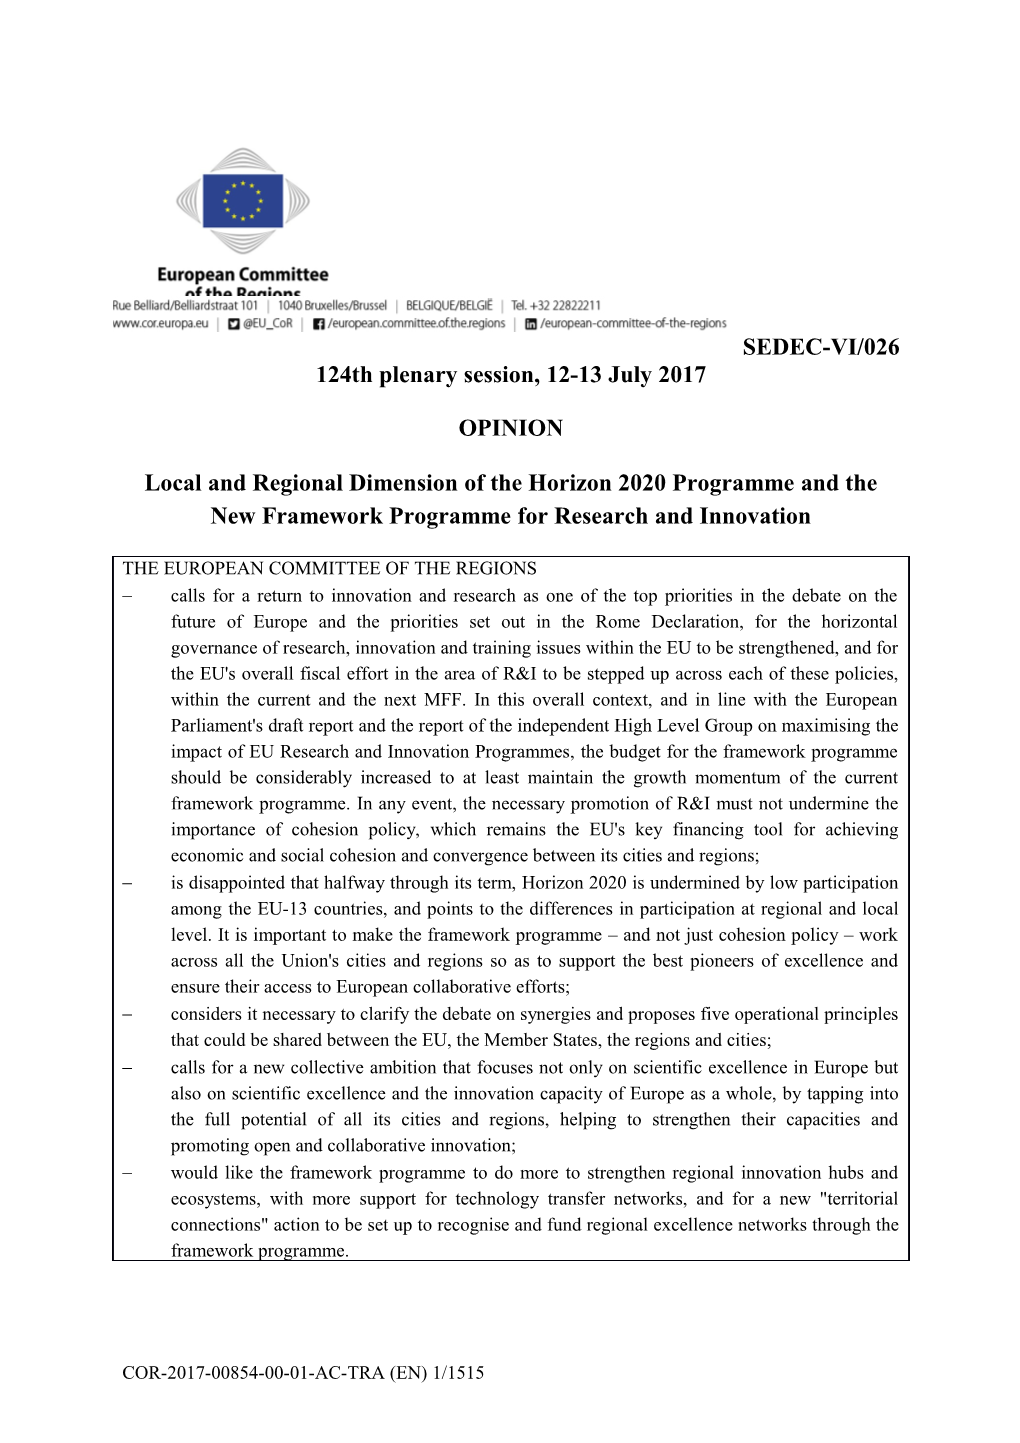 Local and Regional Dimension of Horizon 2020 and the New Framework Programme